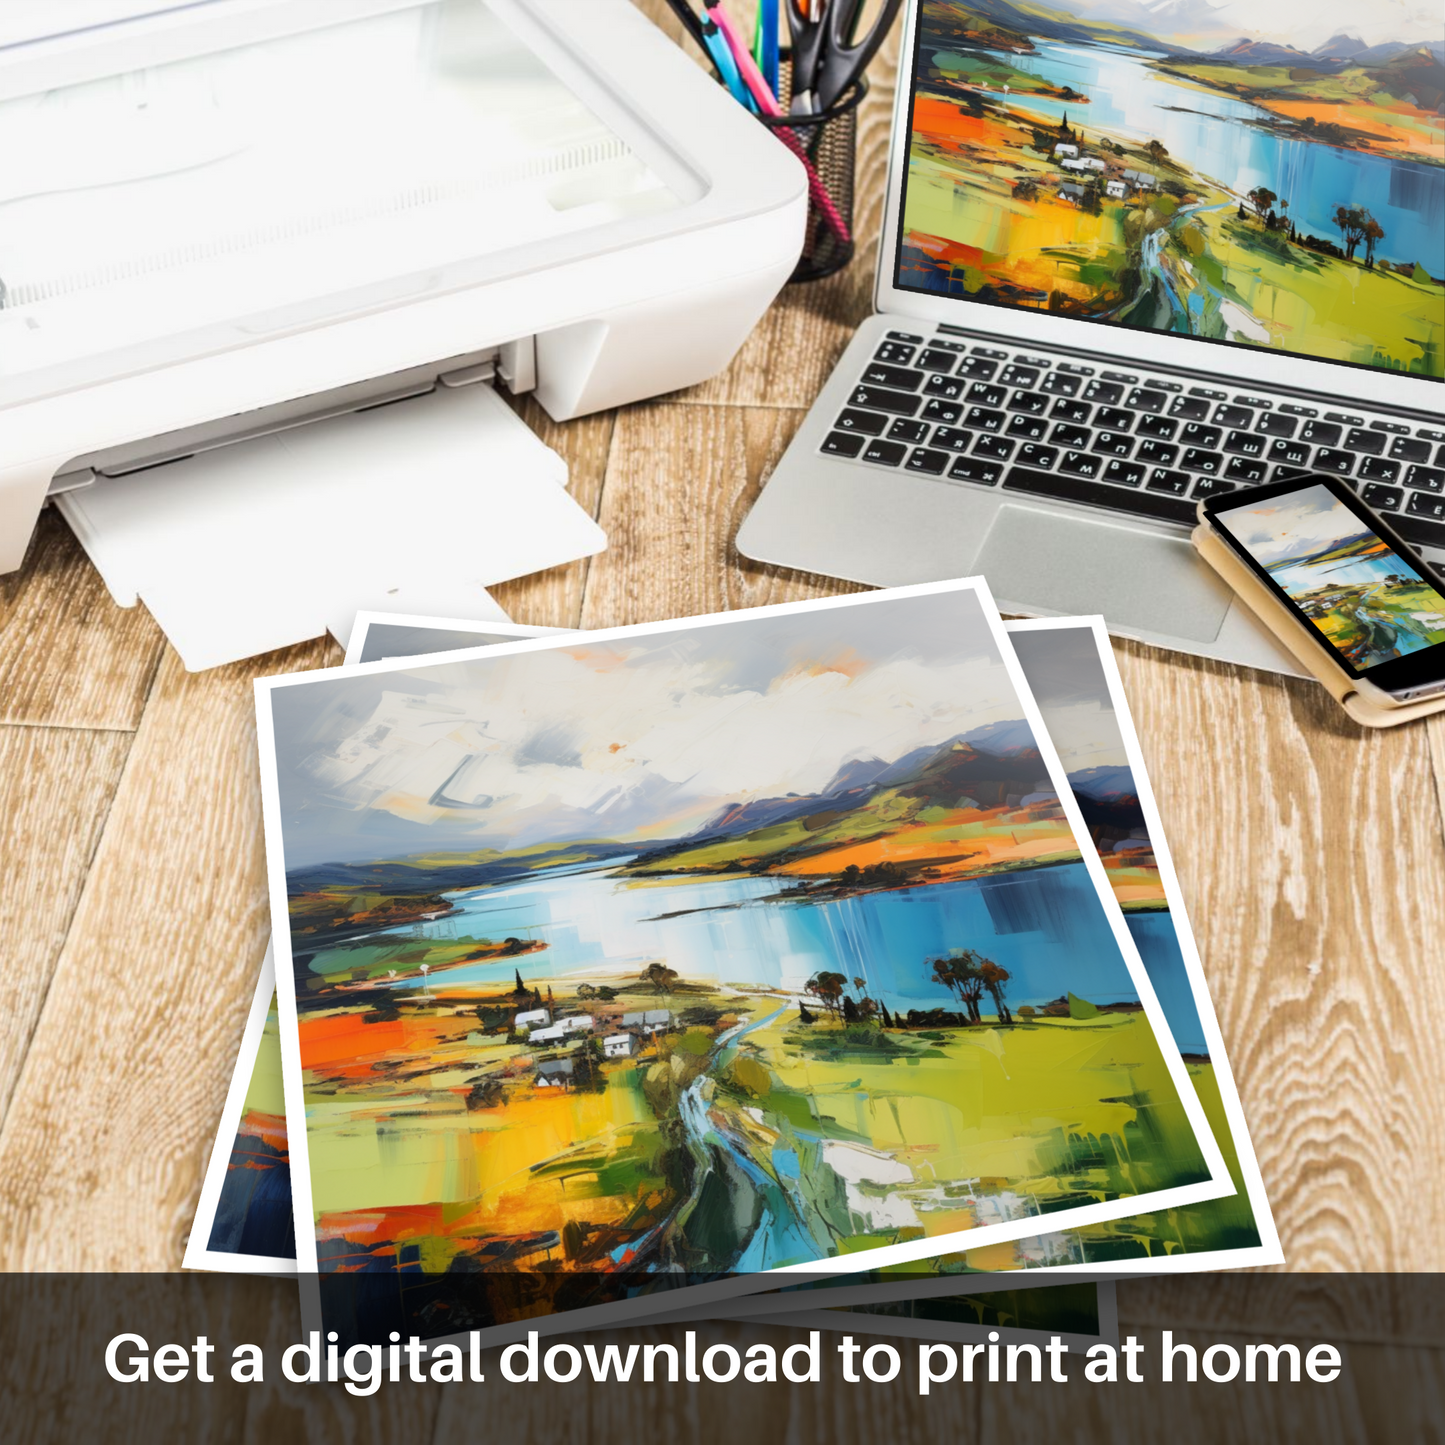 Downloadable and printable picture of Loch Leven, Perth and Kinross